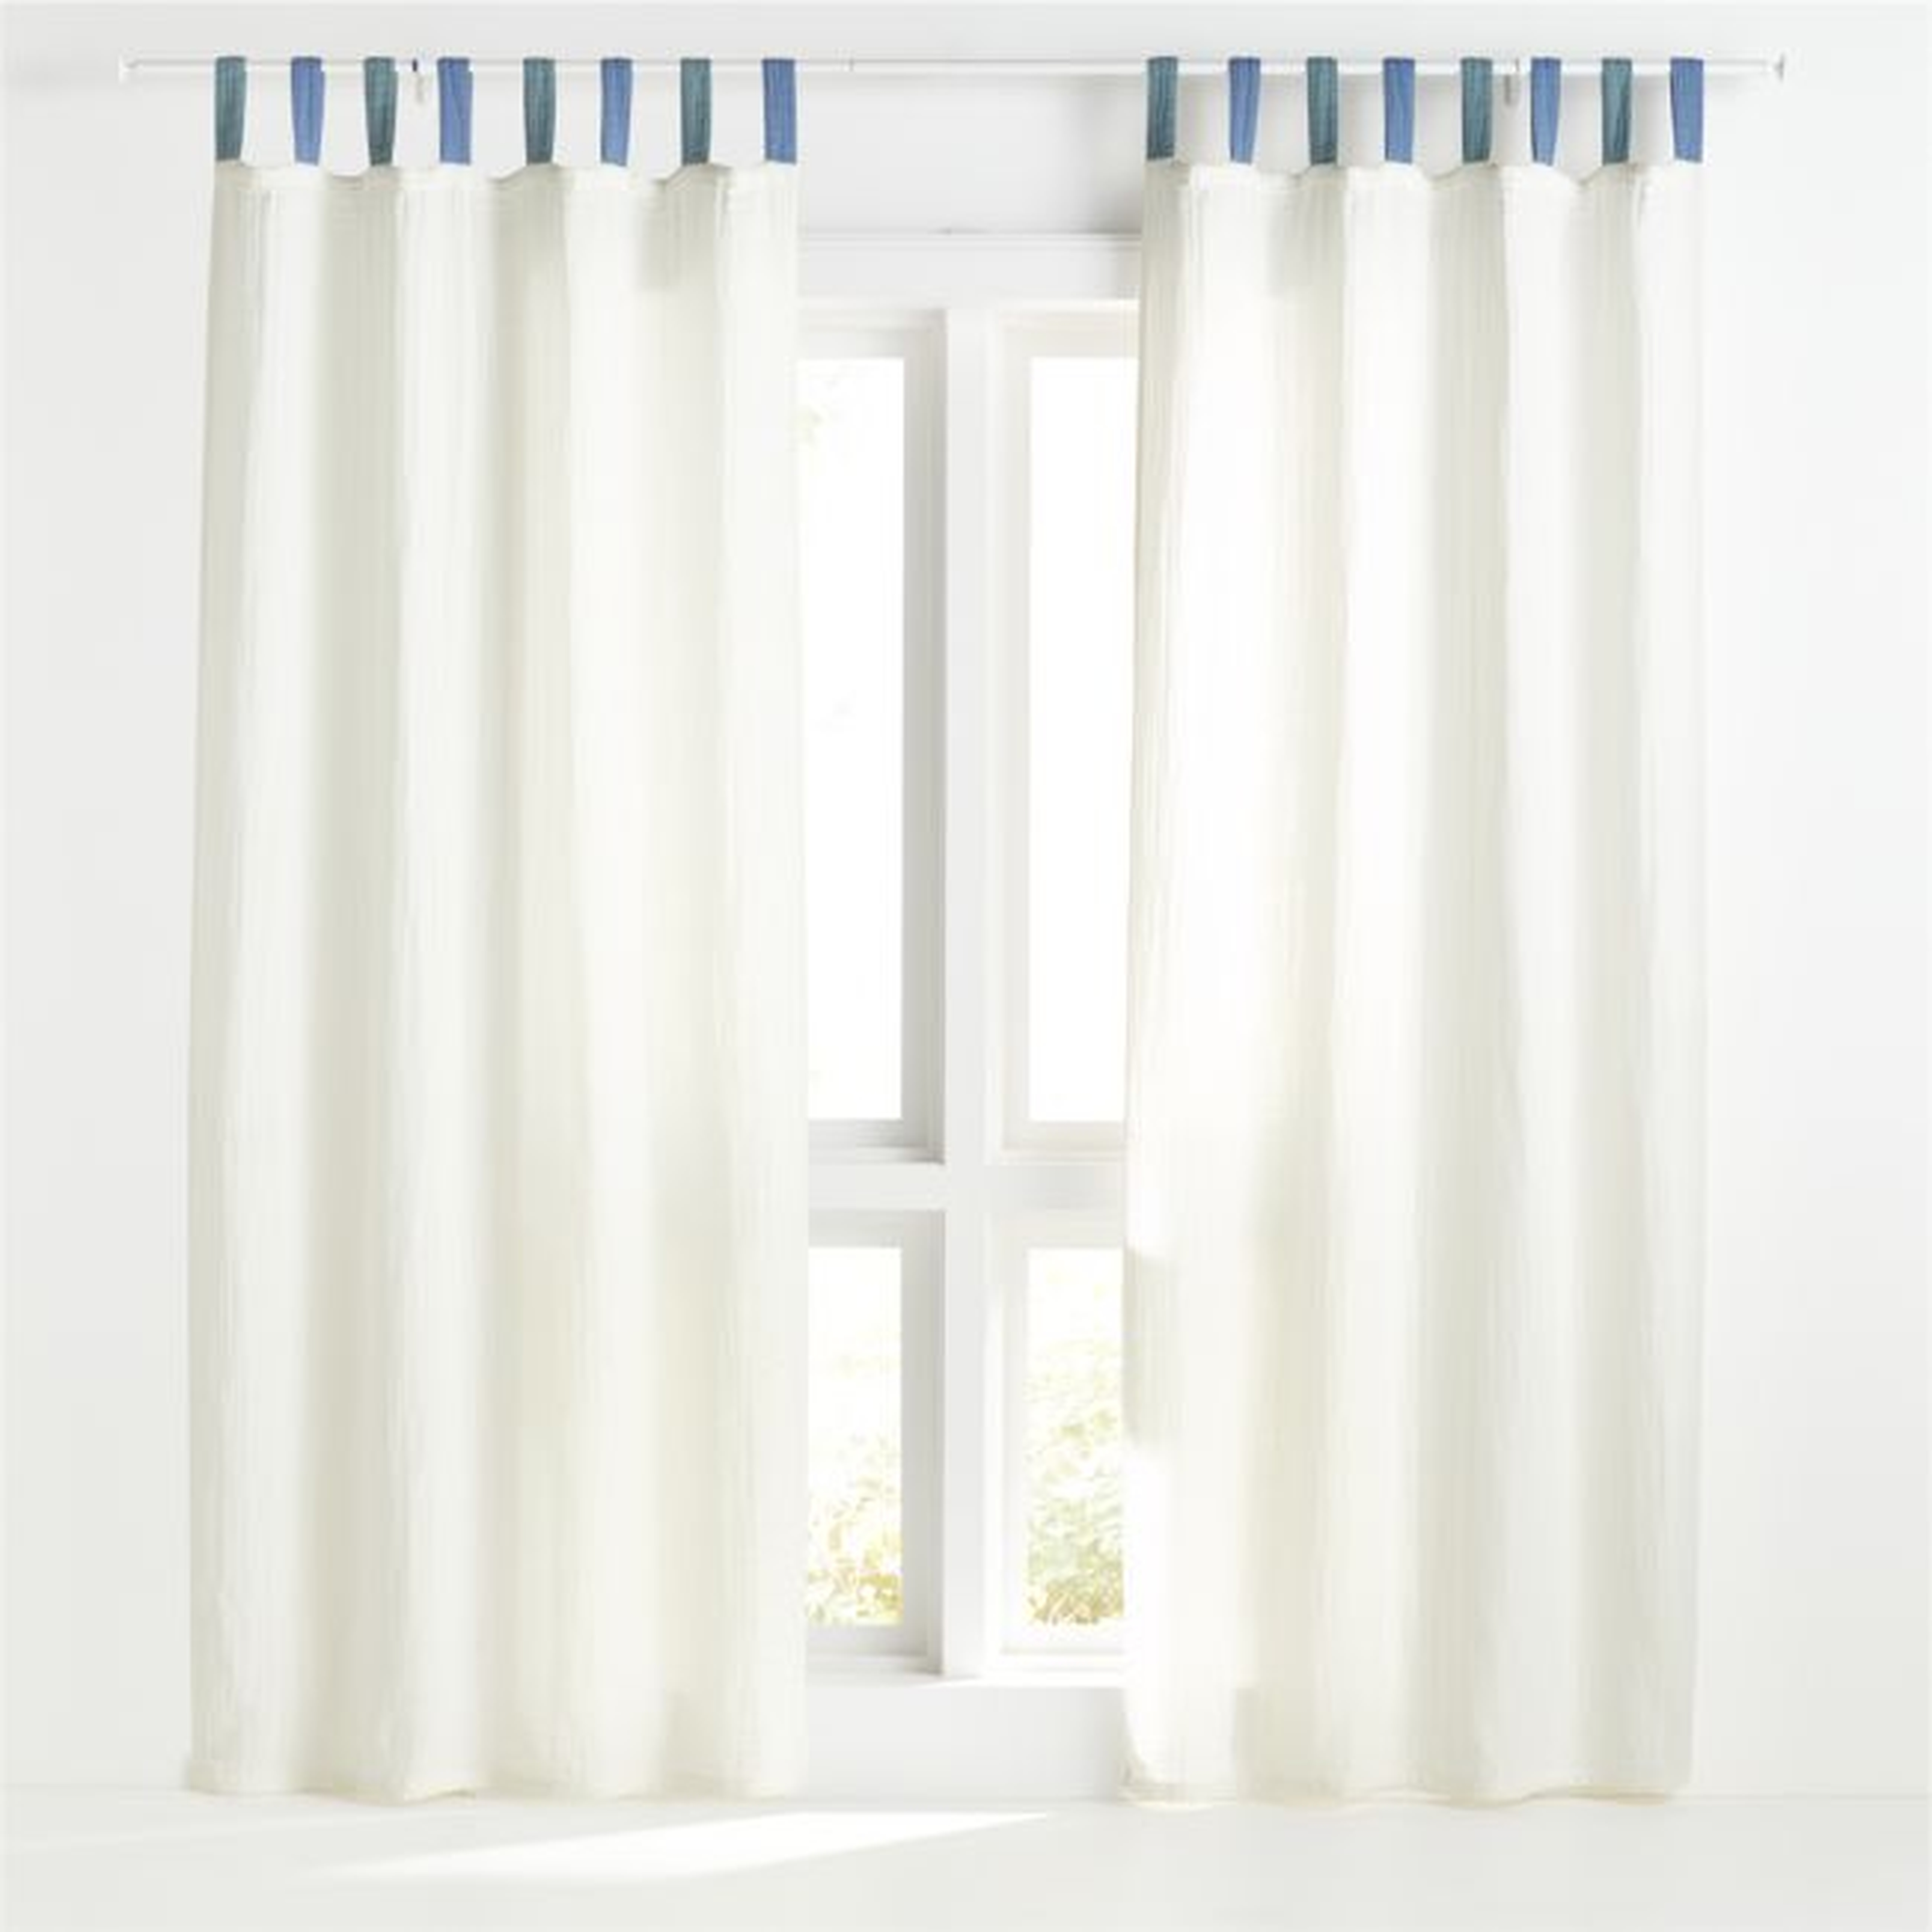 96" Blue Tab Muslin Curtain Panel - Crate and Barrel